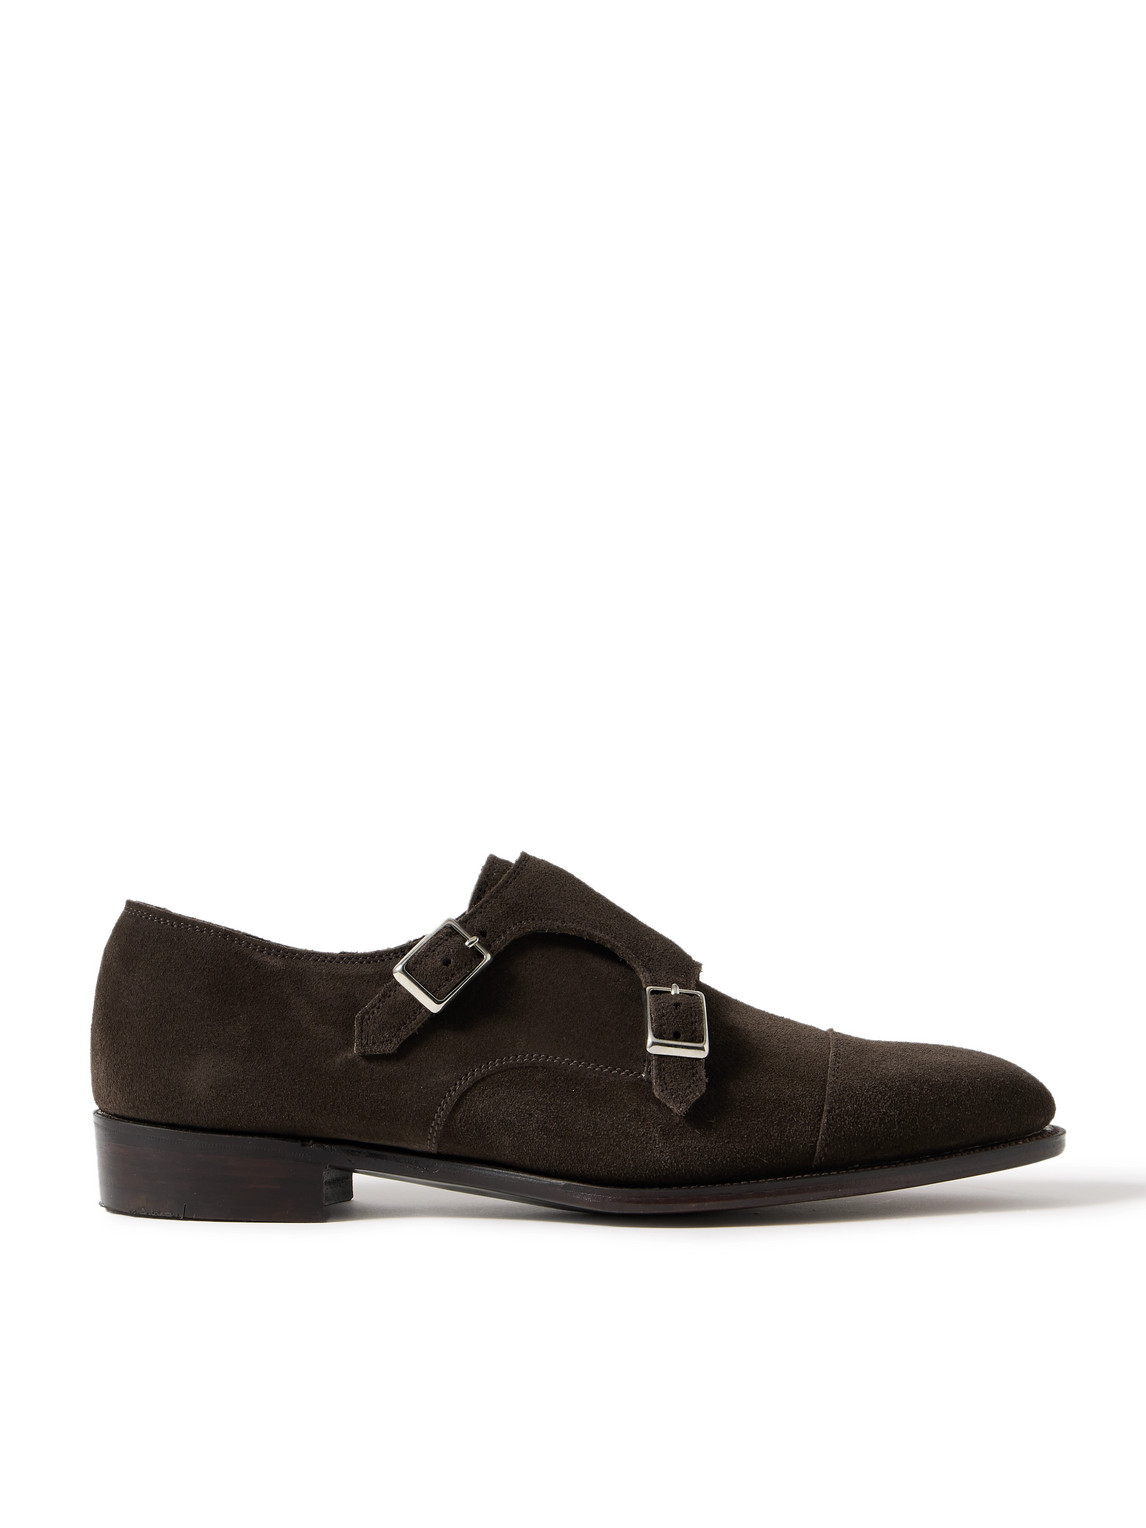 George Cleverley Thomas Cap-toe Suede Monk-strap Shoes In Brown